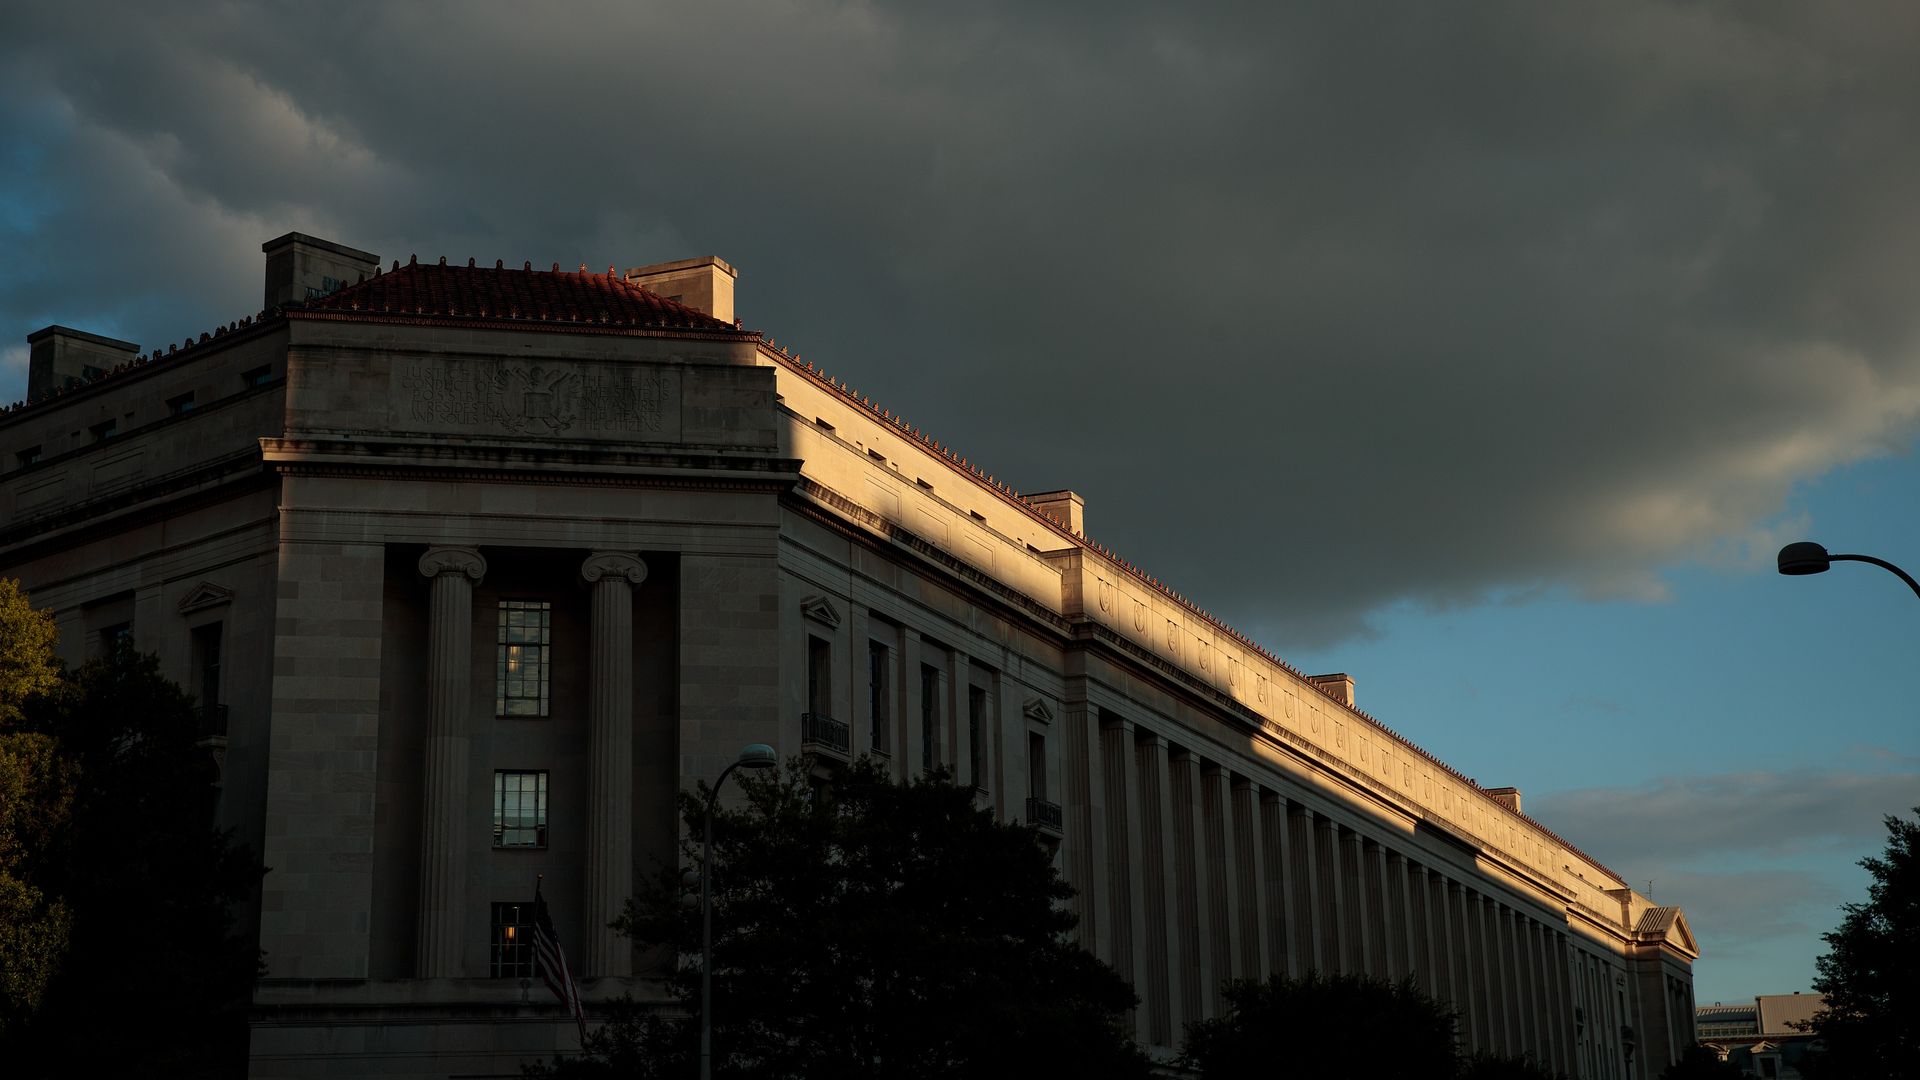 The headquarters of the Department of Justice under a dark sky